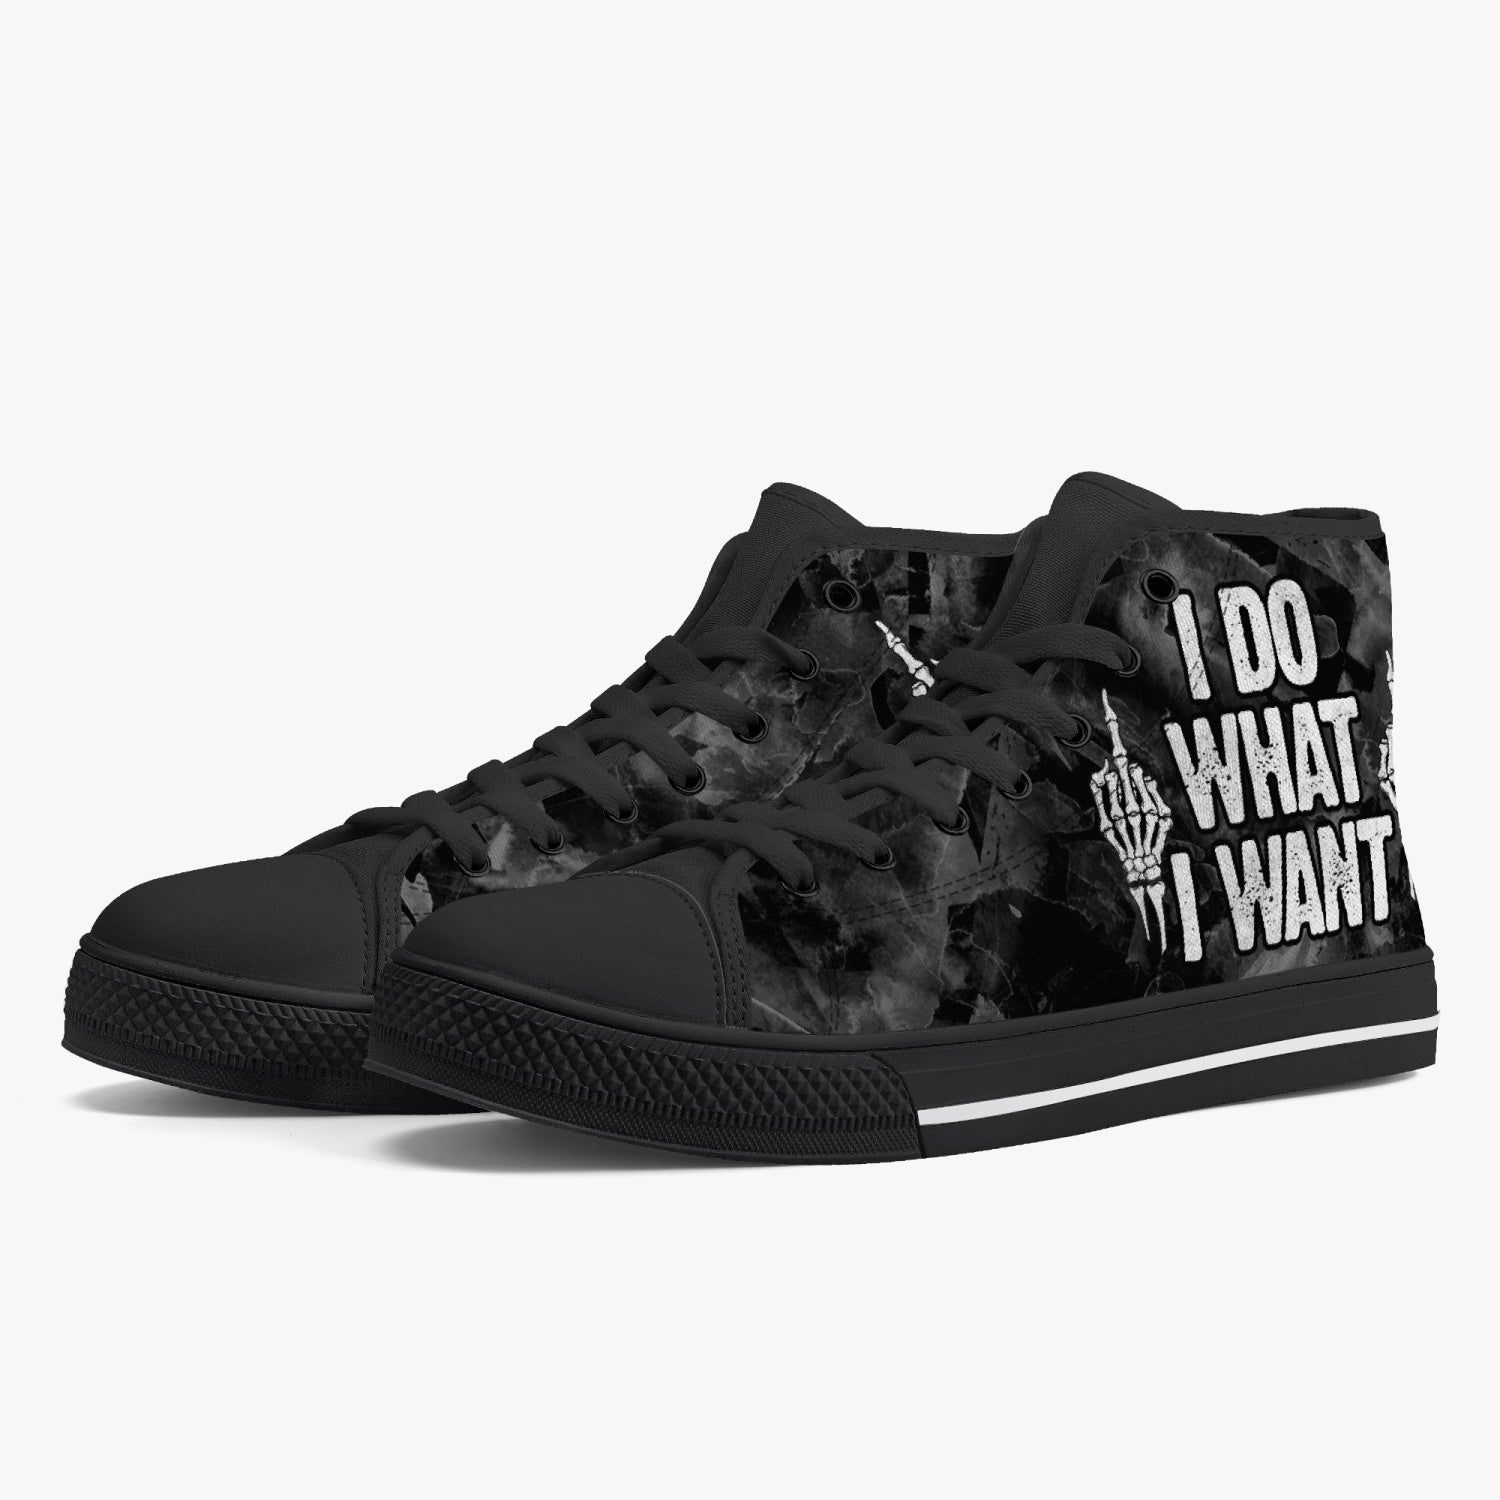 I DO WHAT I WANT HIGH TOP CANVAS SHOES - TY0510221